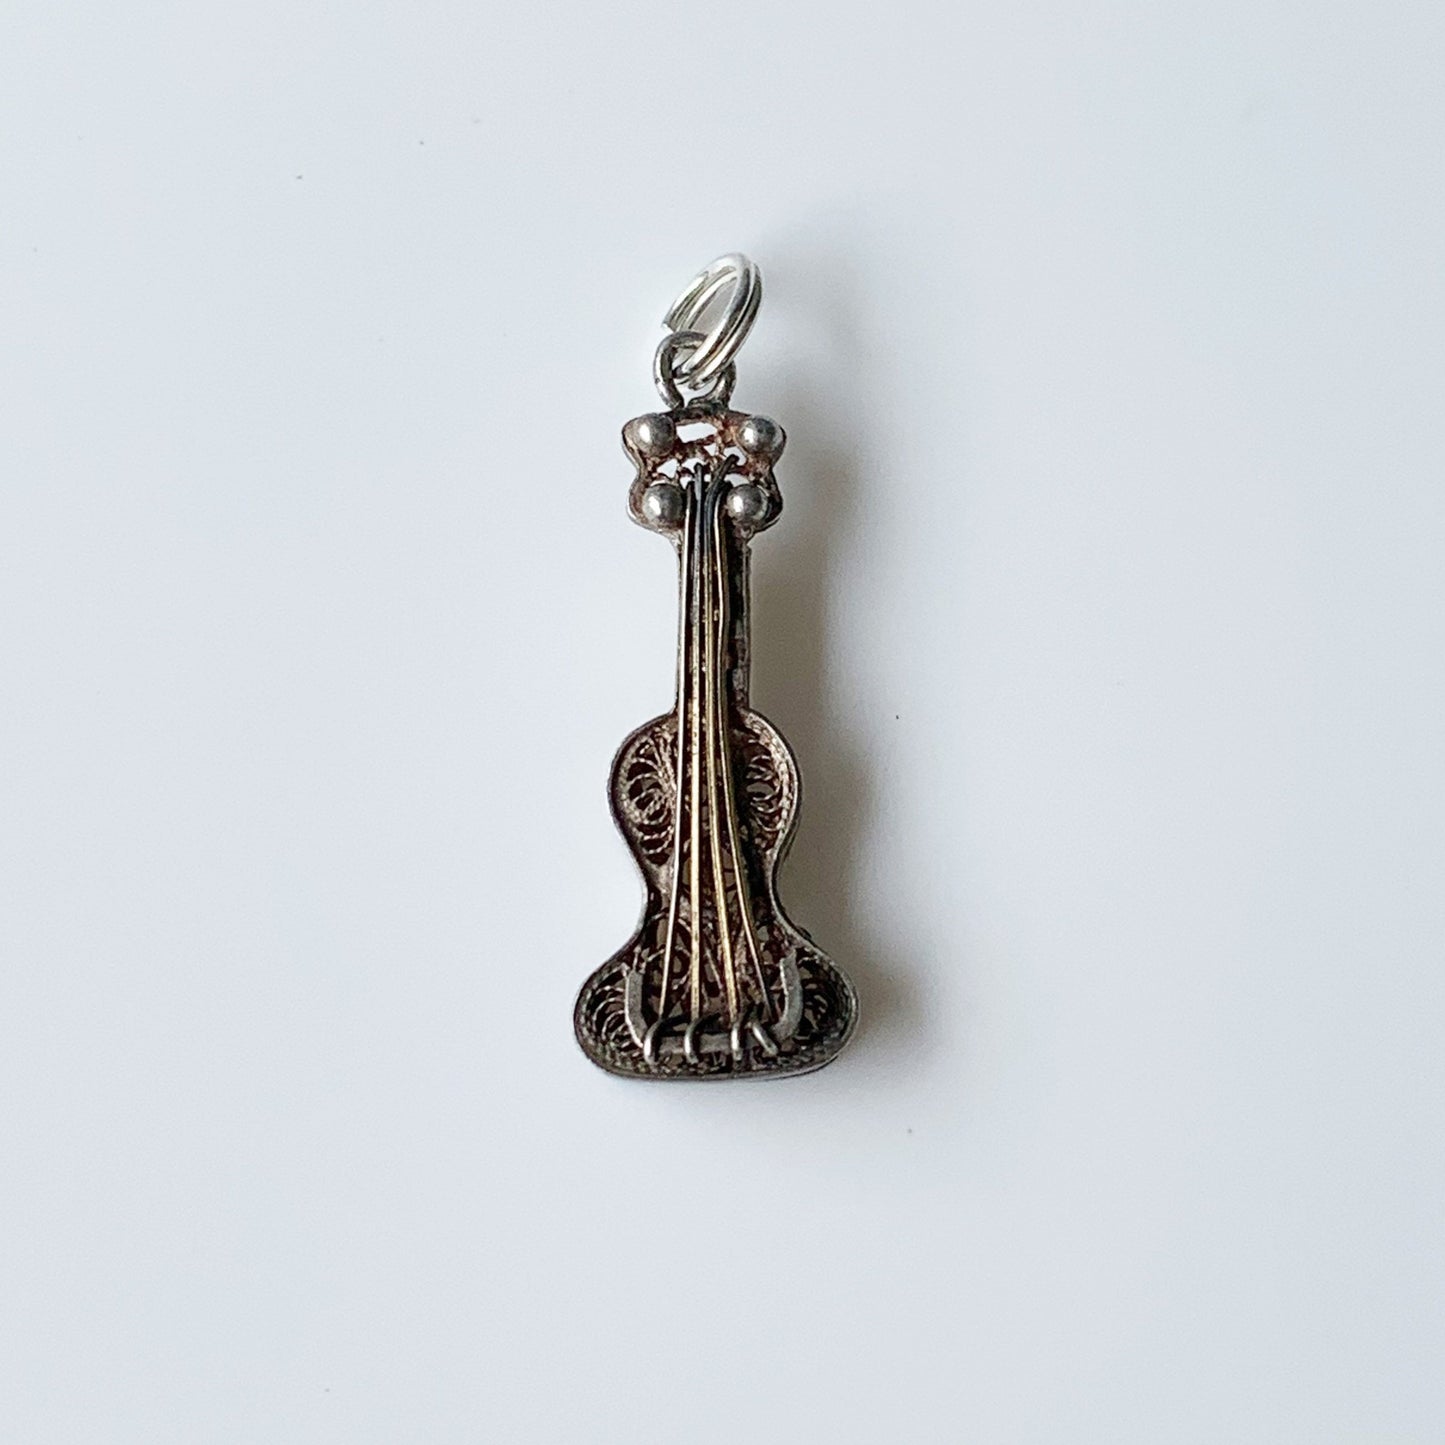 Vintage Silver Filigree Guitar Charm | Musical Instrument Jewelry | Sterling Silver Guitar Pendant